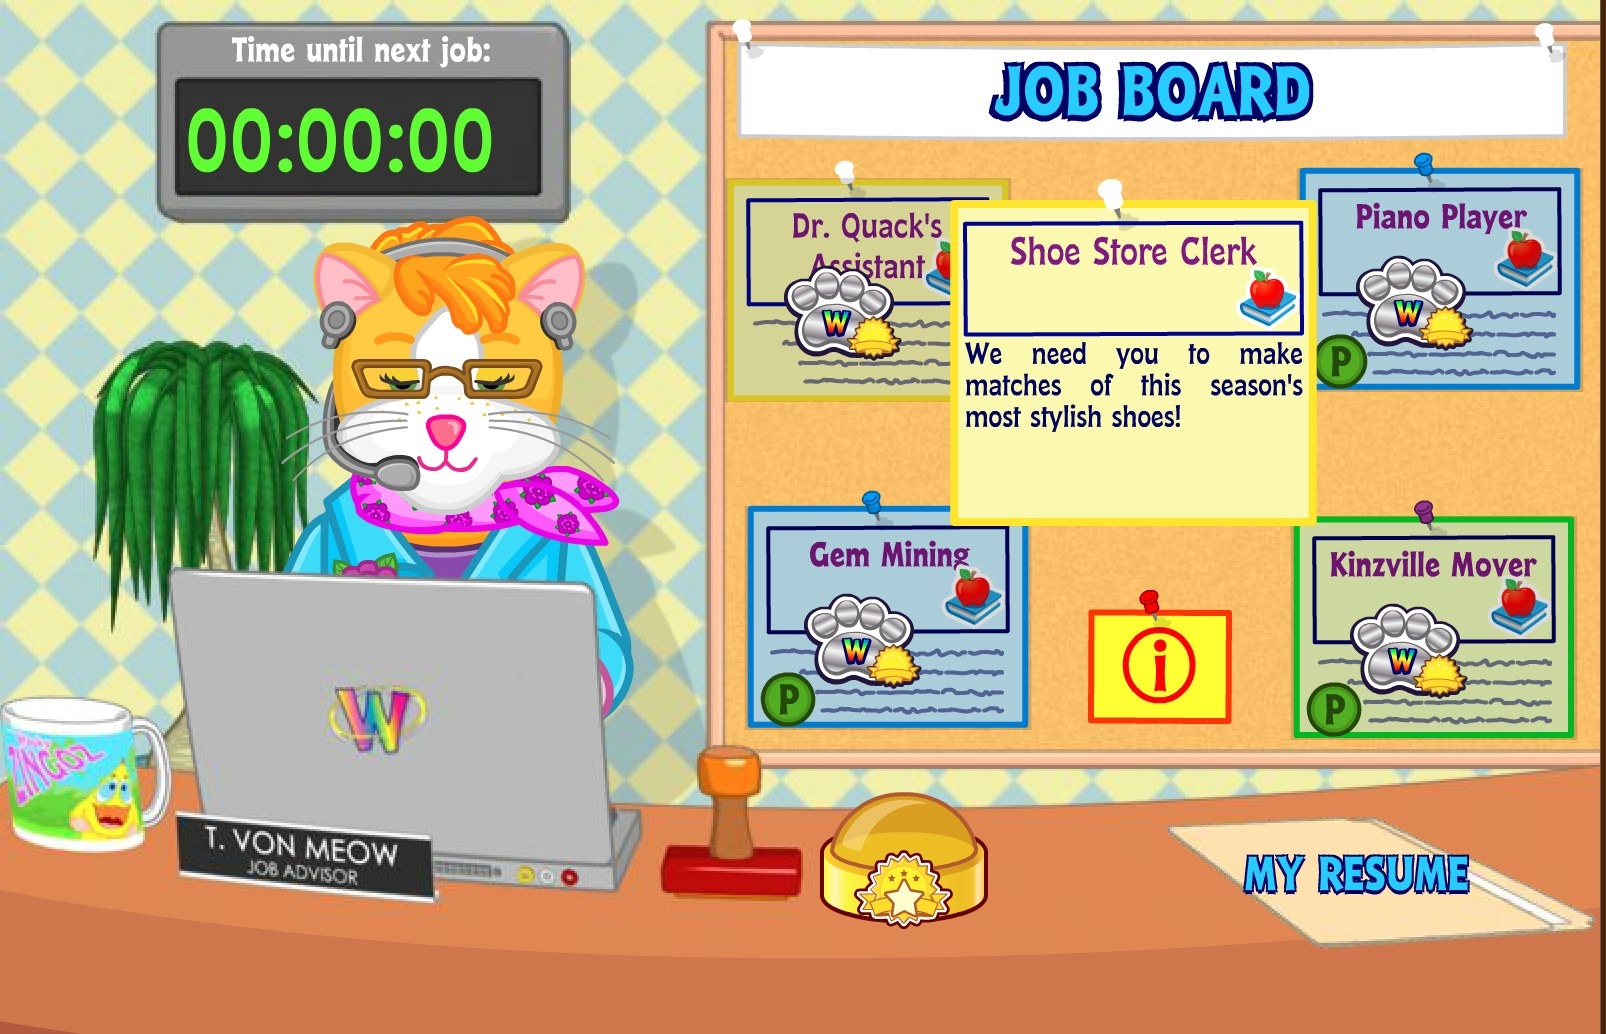 An orange cat named T. Von Meow sits in front of a laptop at her desk wearing a headpiece next to a job board